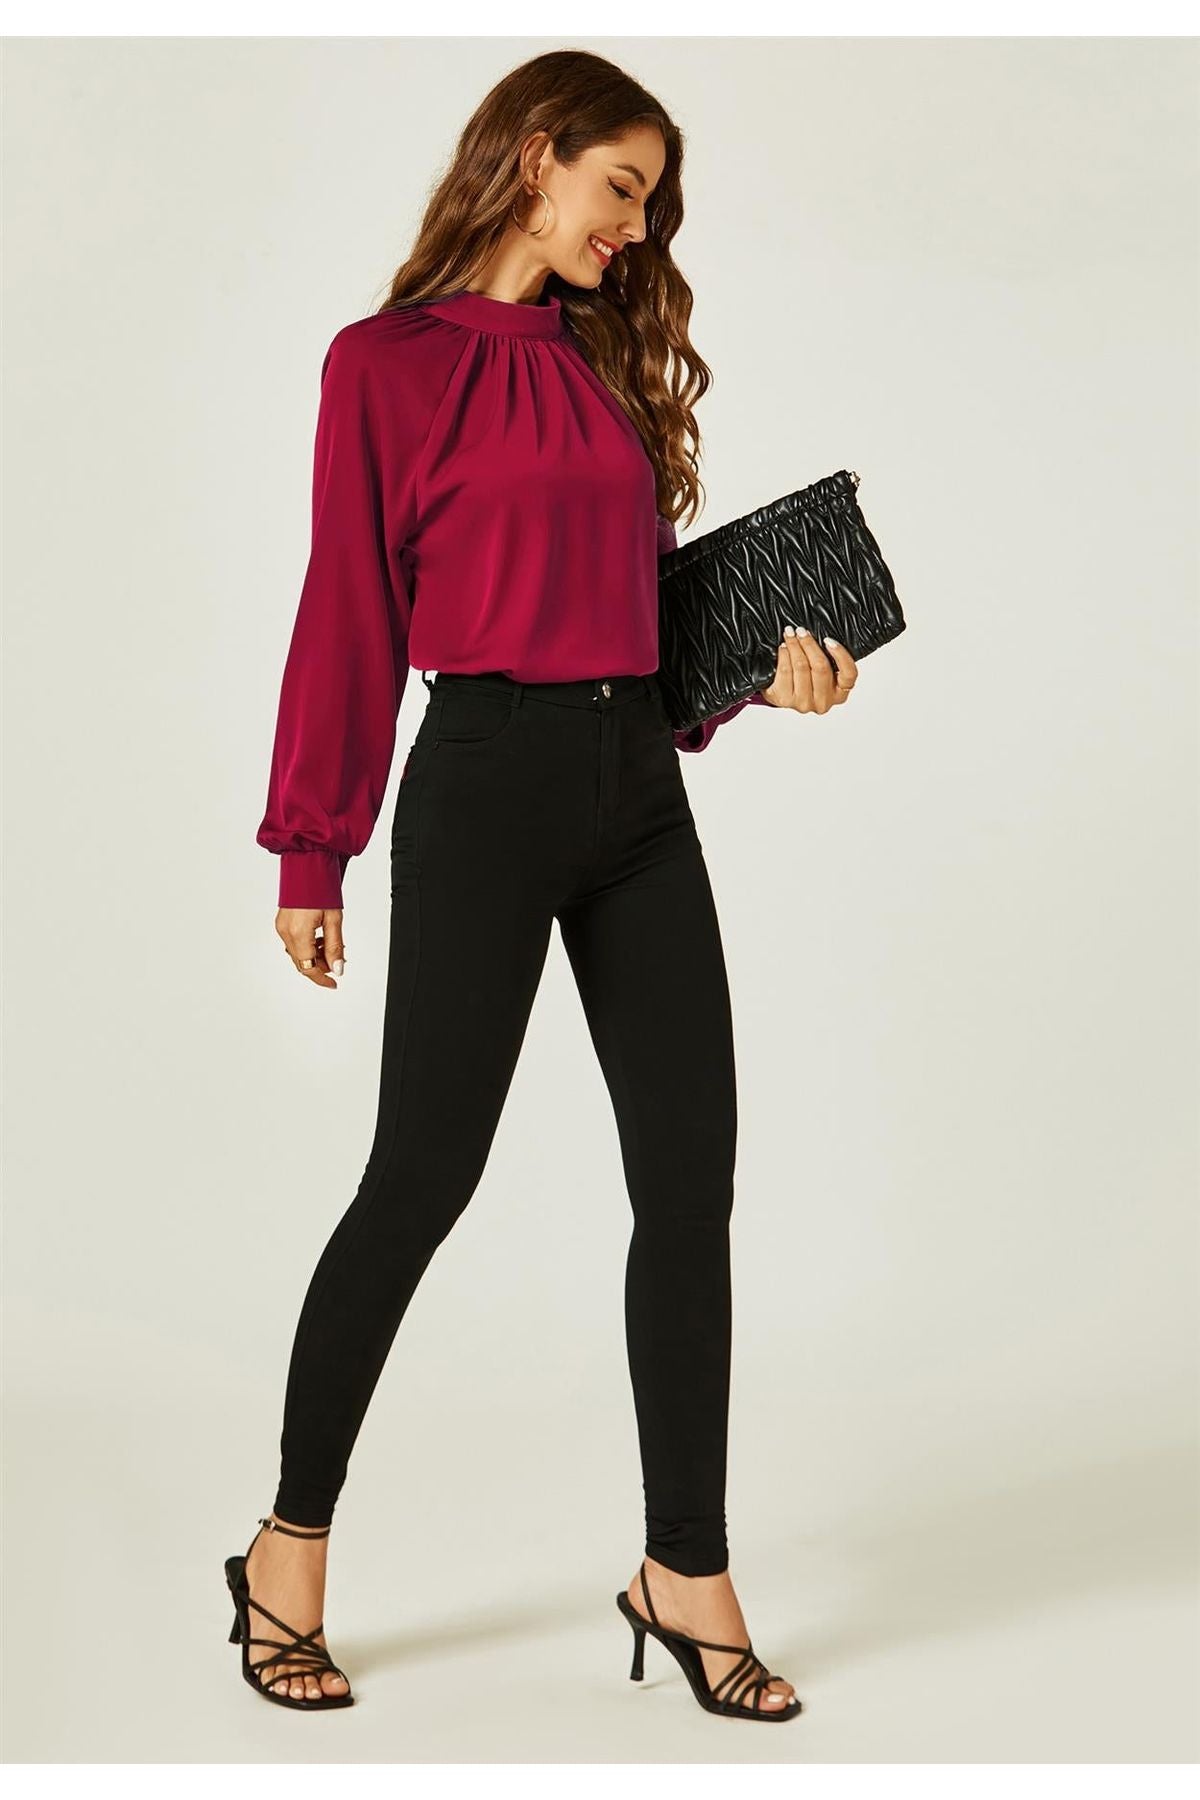 Halter Neck Long Sleeve Blouse Top In Wine Red FS487